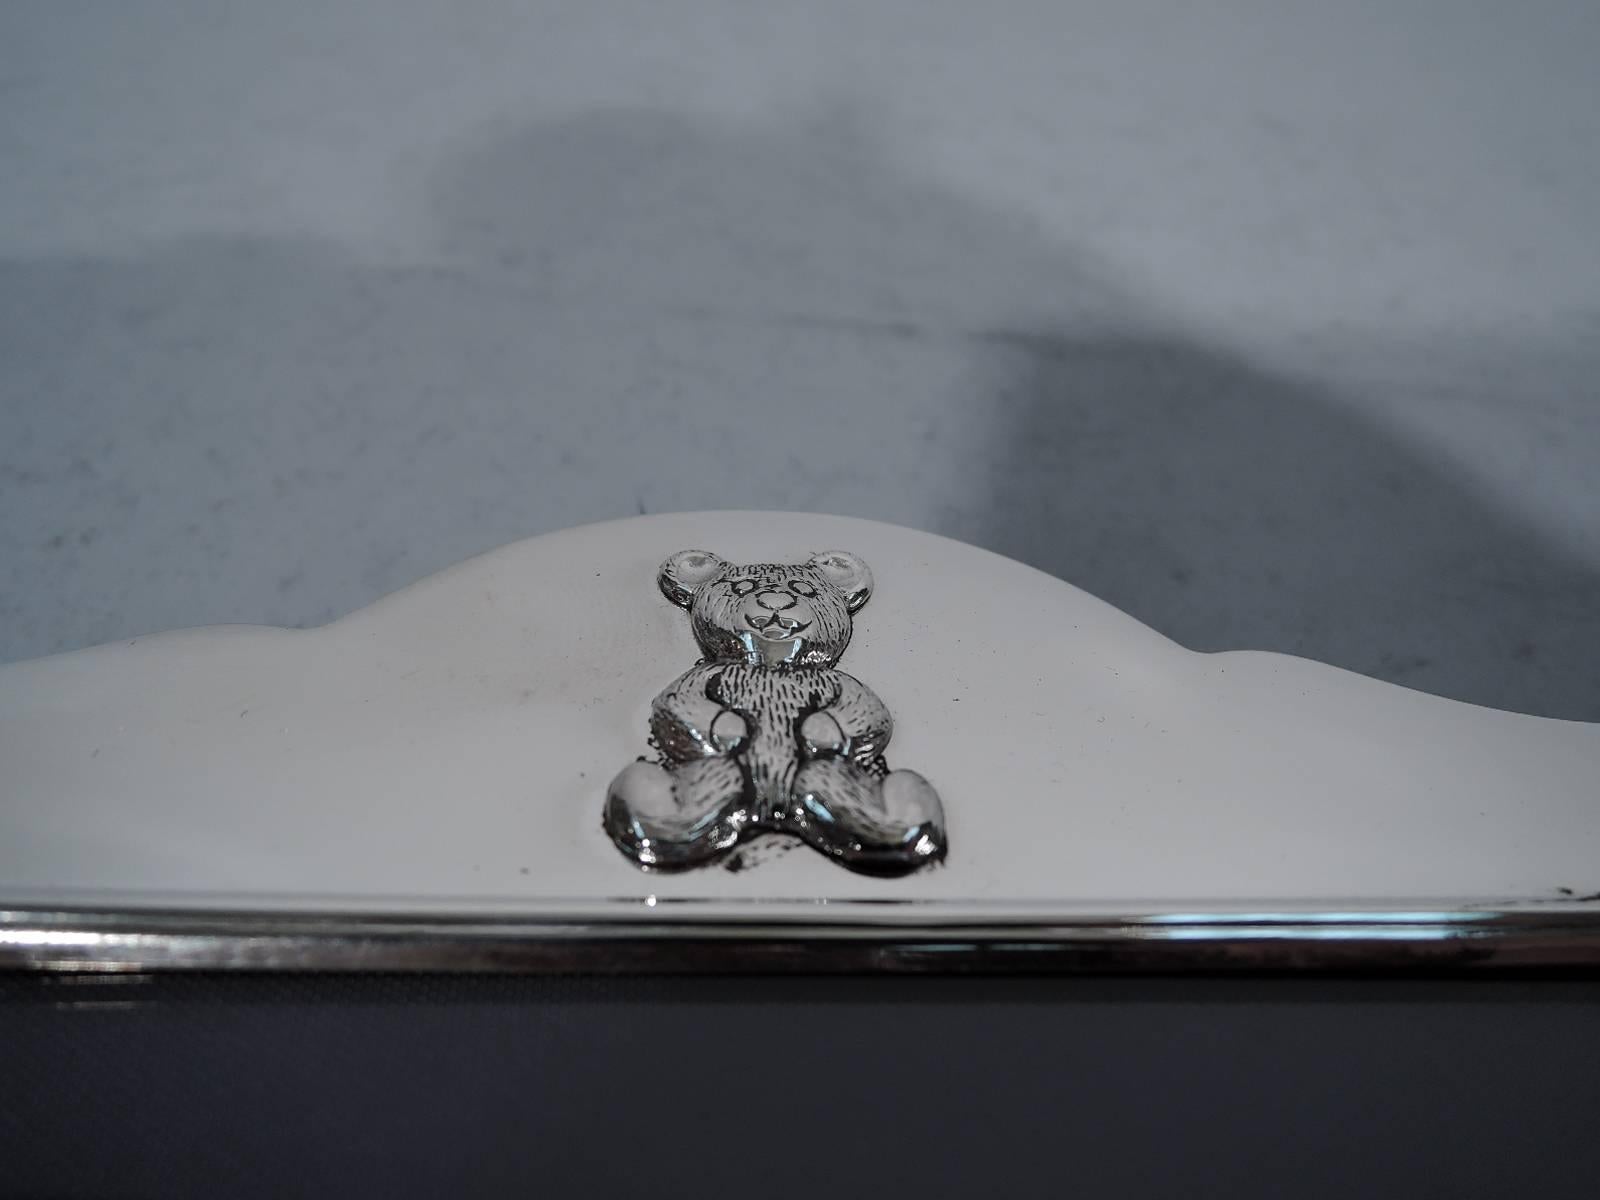 Sterling silver picture frame. Made by Carr’s of Sheffield in 1997. Vertical rectangular window with straight borders and arched top with applied teddy bear – a sweet beast with stubby limbs and alert ears. A great baby gift. With glass, silk